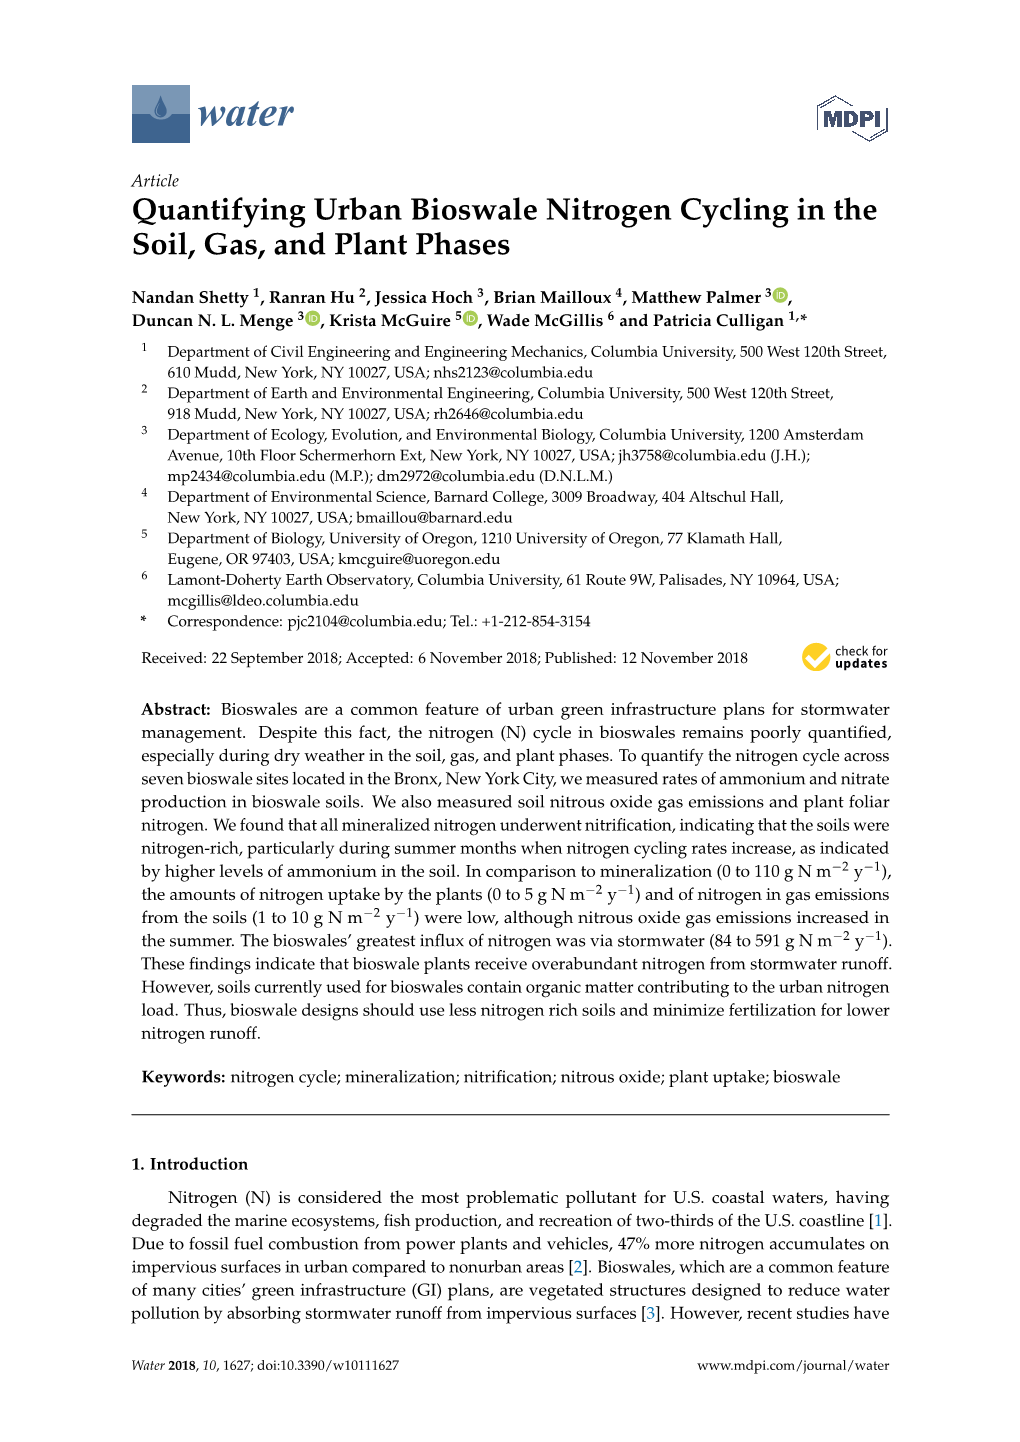 Quantifying Urban Bioswale Nitrogen Cycling in the Soil, Gas, and Plant Phases